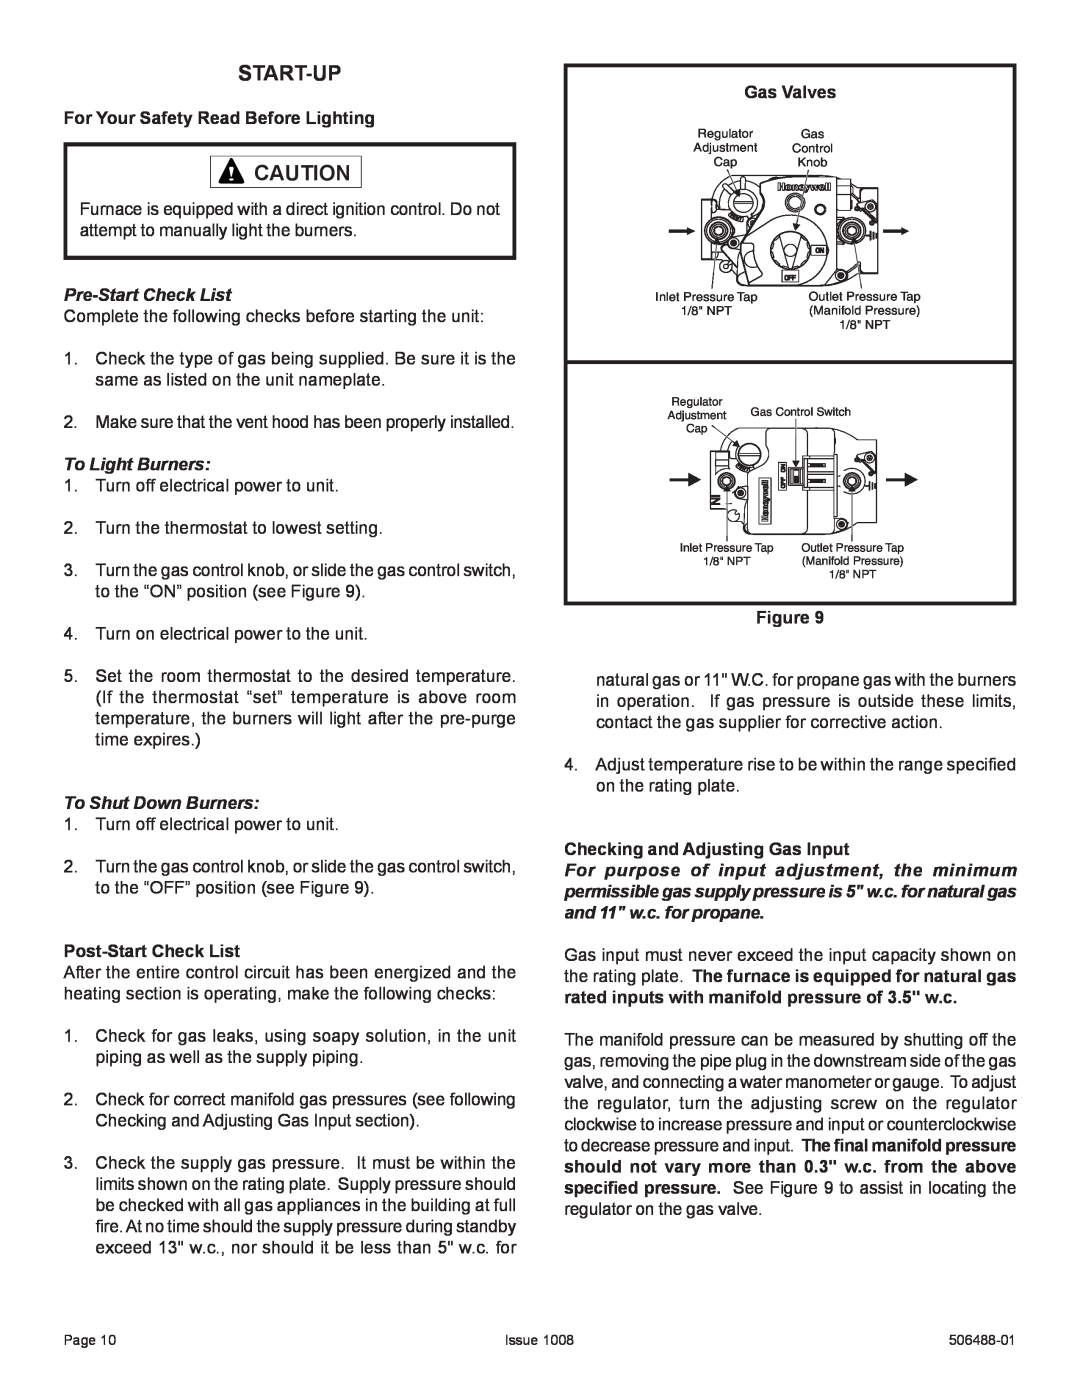 Allied Air Enterprises 4PGE manual Start-Up, For Your Safety Read Before Lighting, Pre-StartCheck List, To Light Burners 